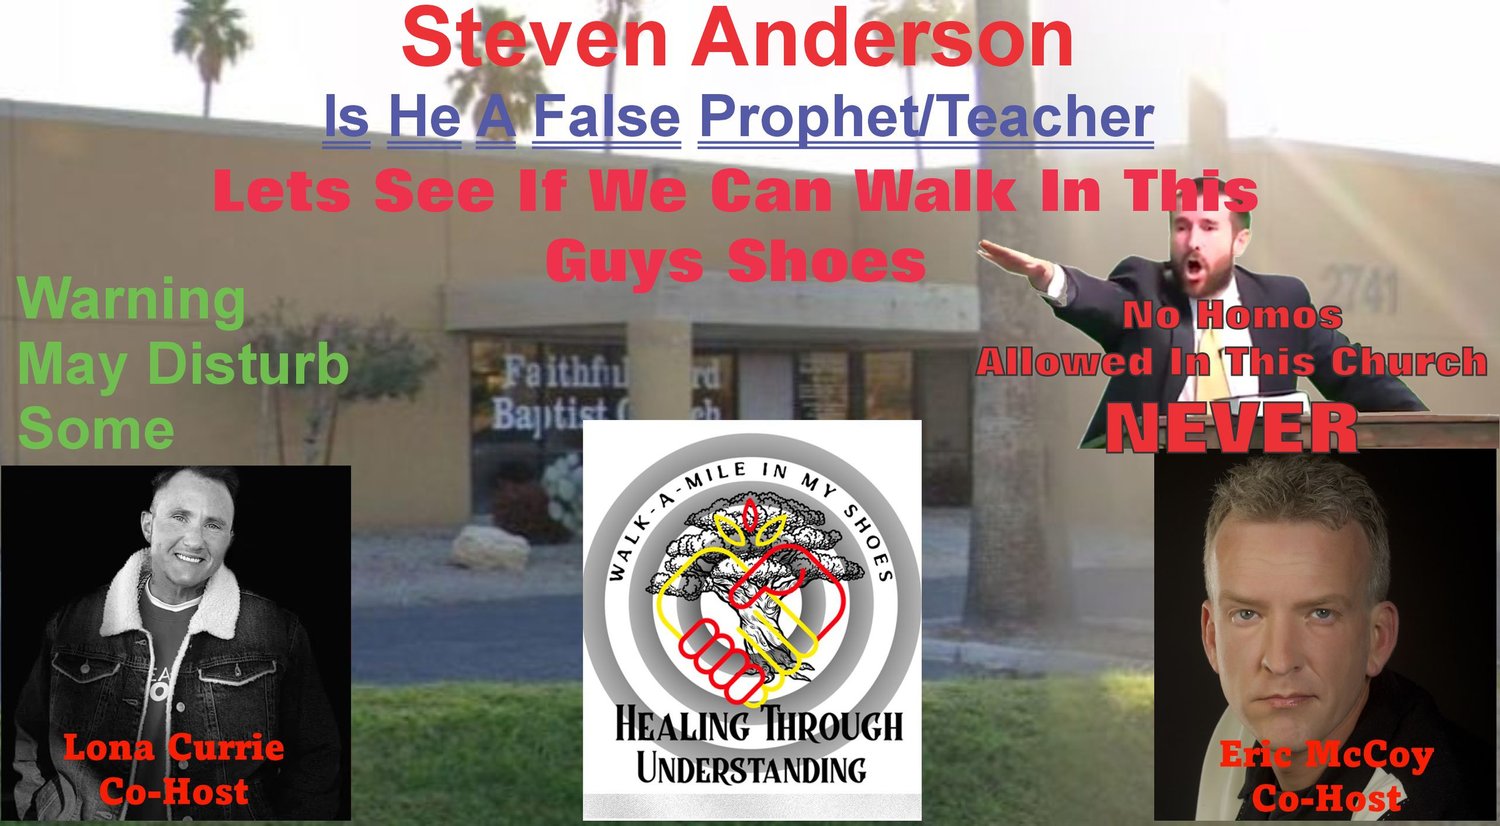 "Steve Anderson. This Pastor, Probably Hates You. Is He a False Prophet?"